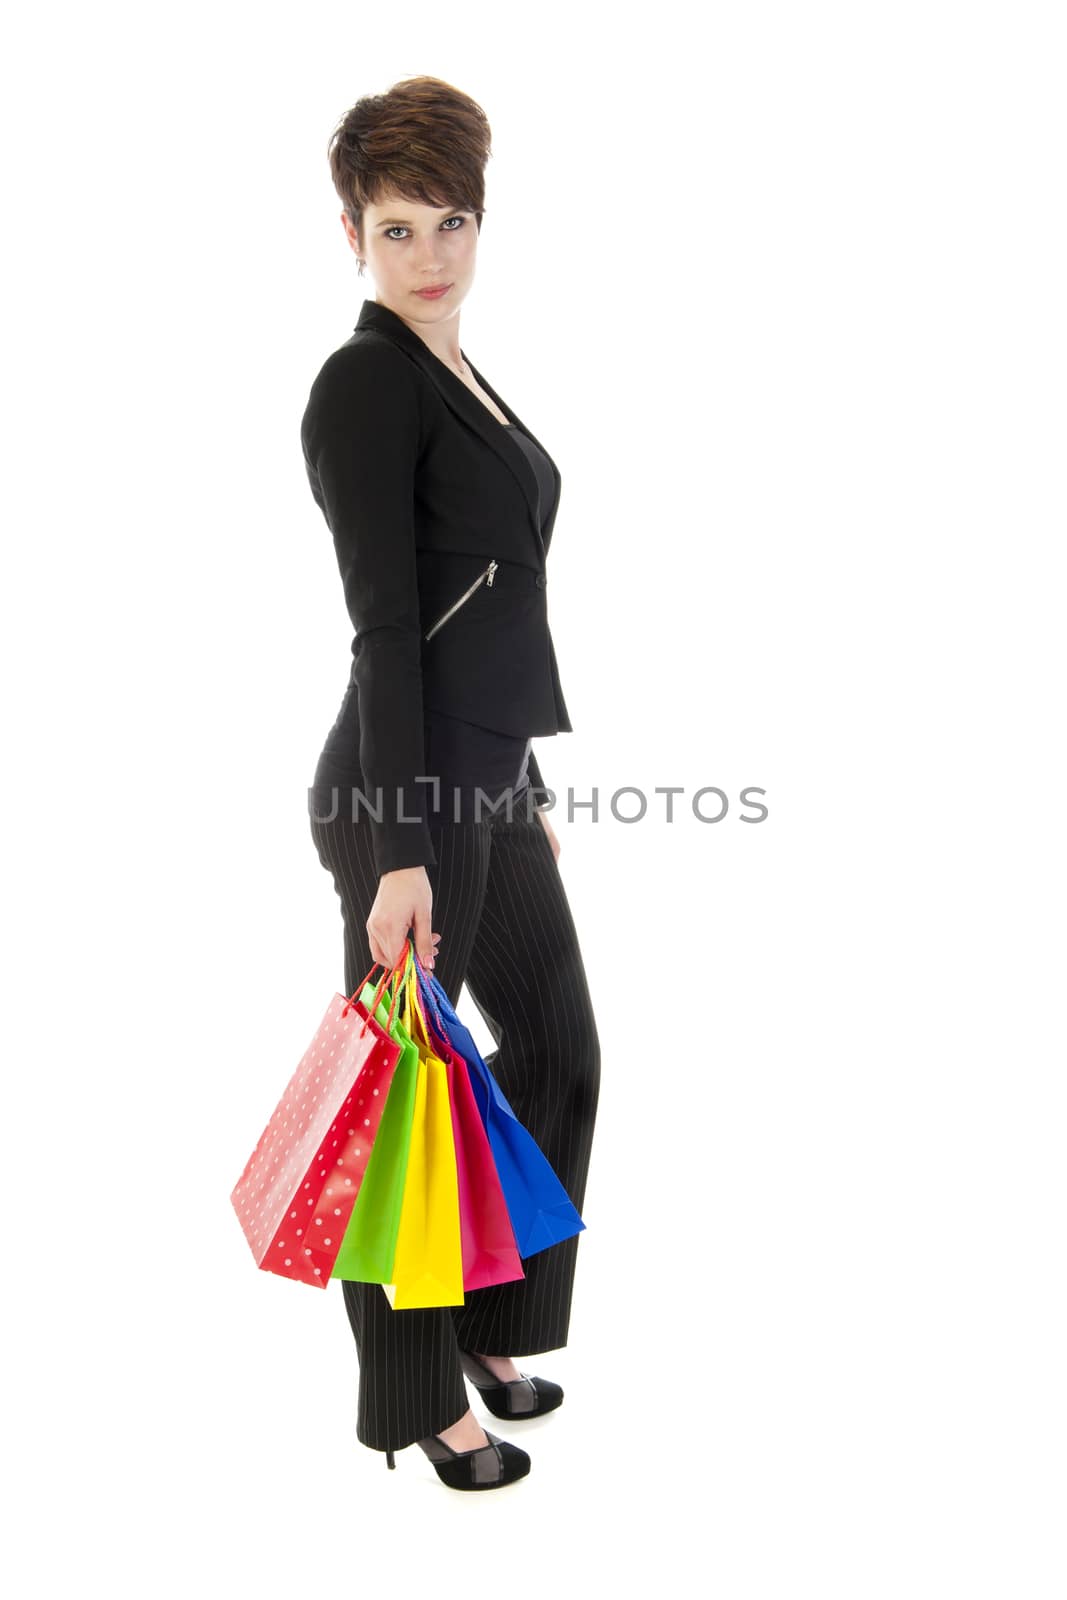 a girl with a lot of shopping bags in all kind of colors